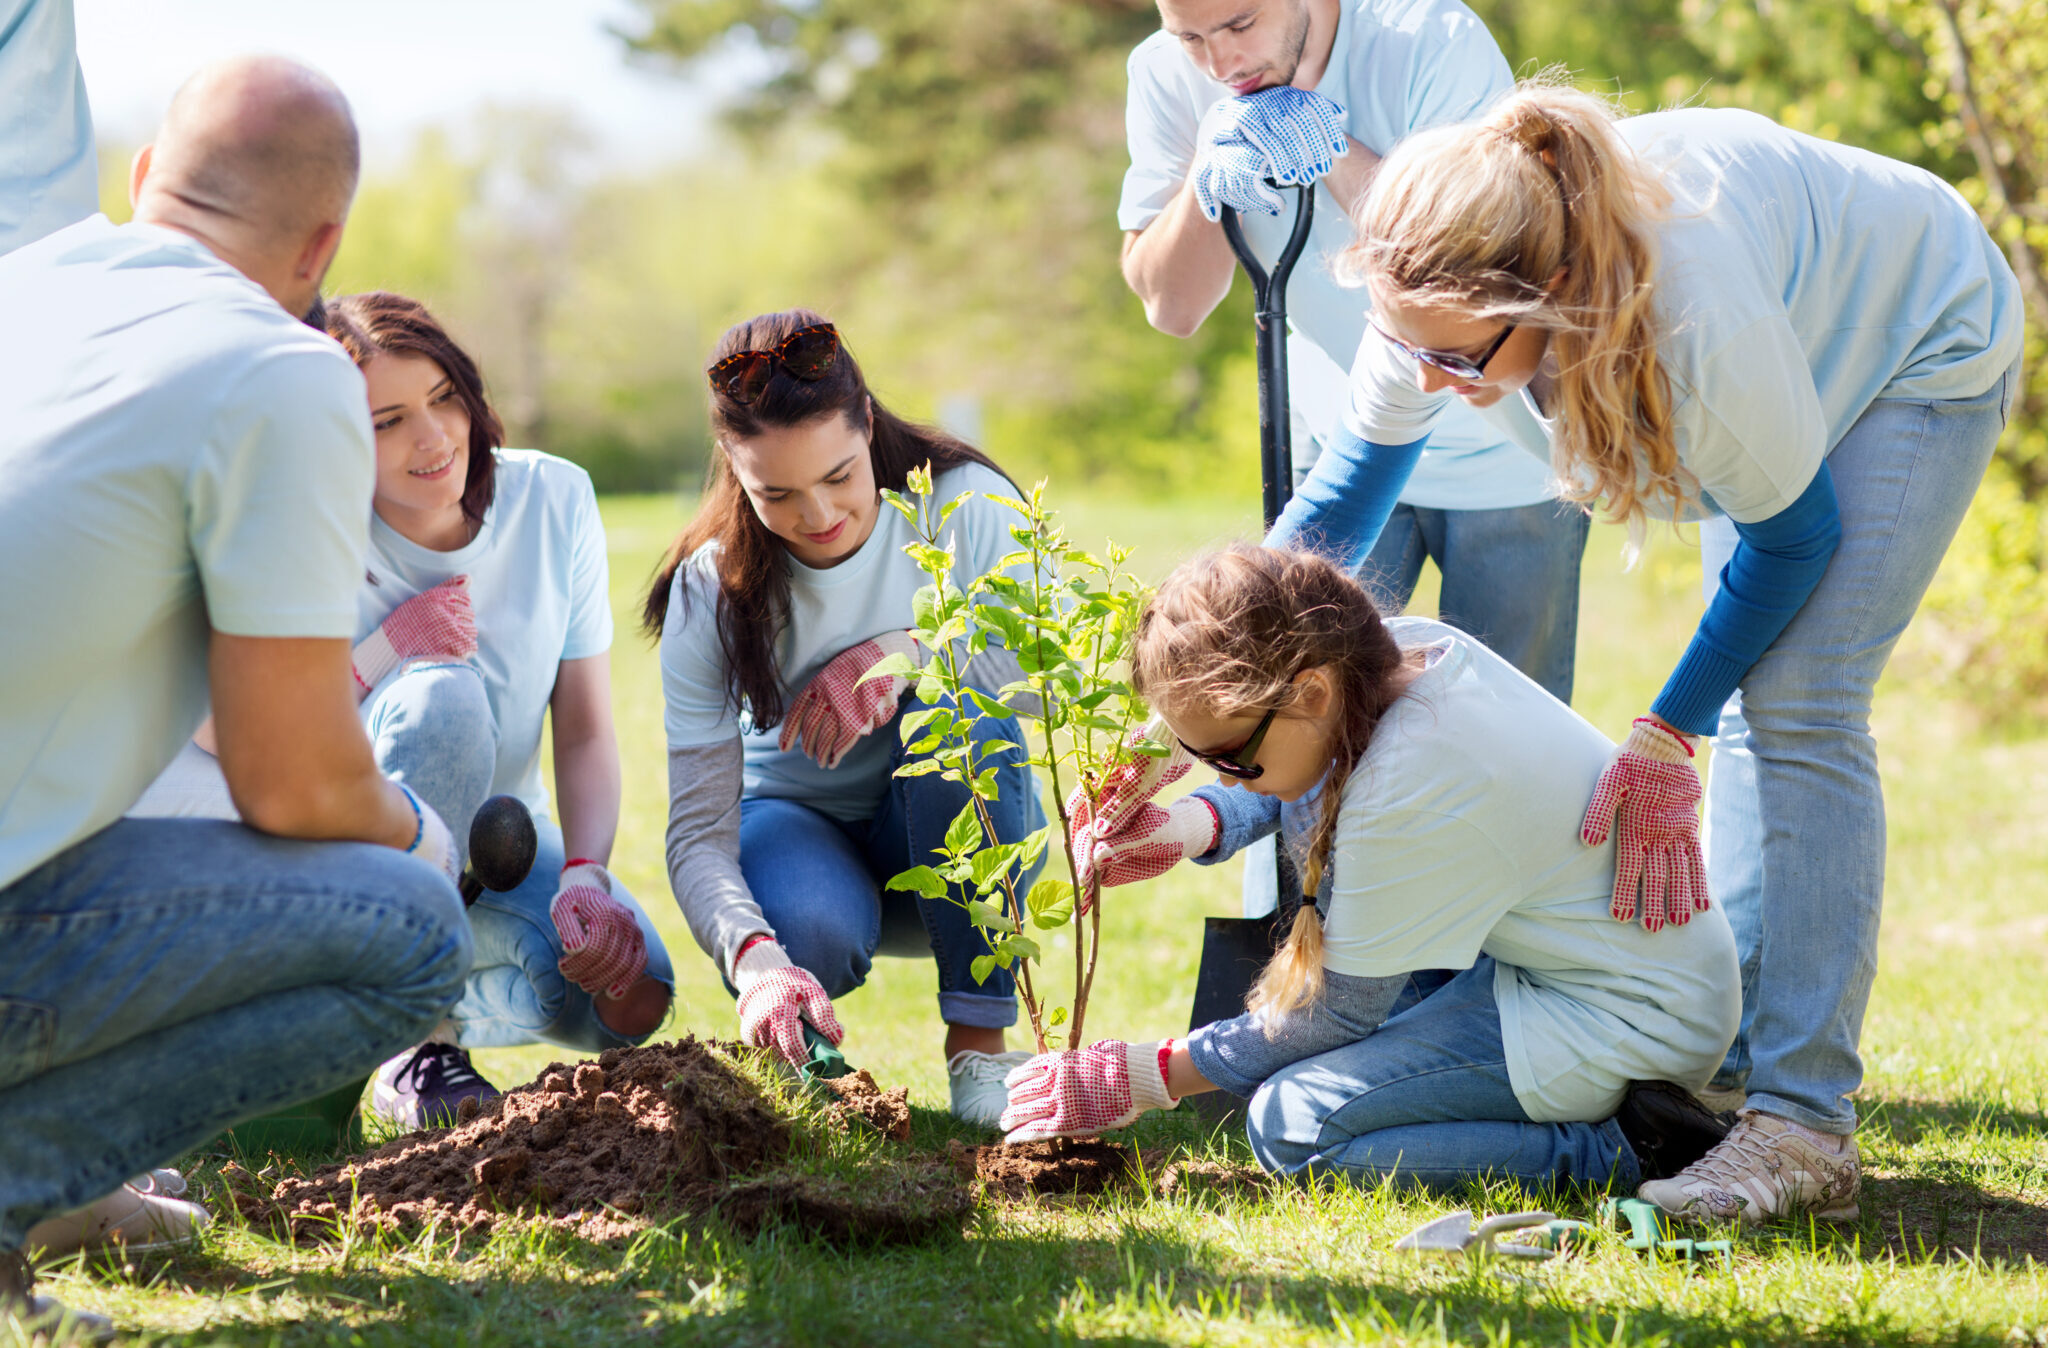 A group of people planting trees in the grass.